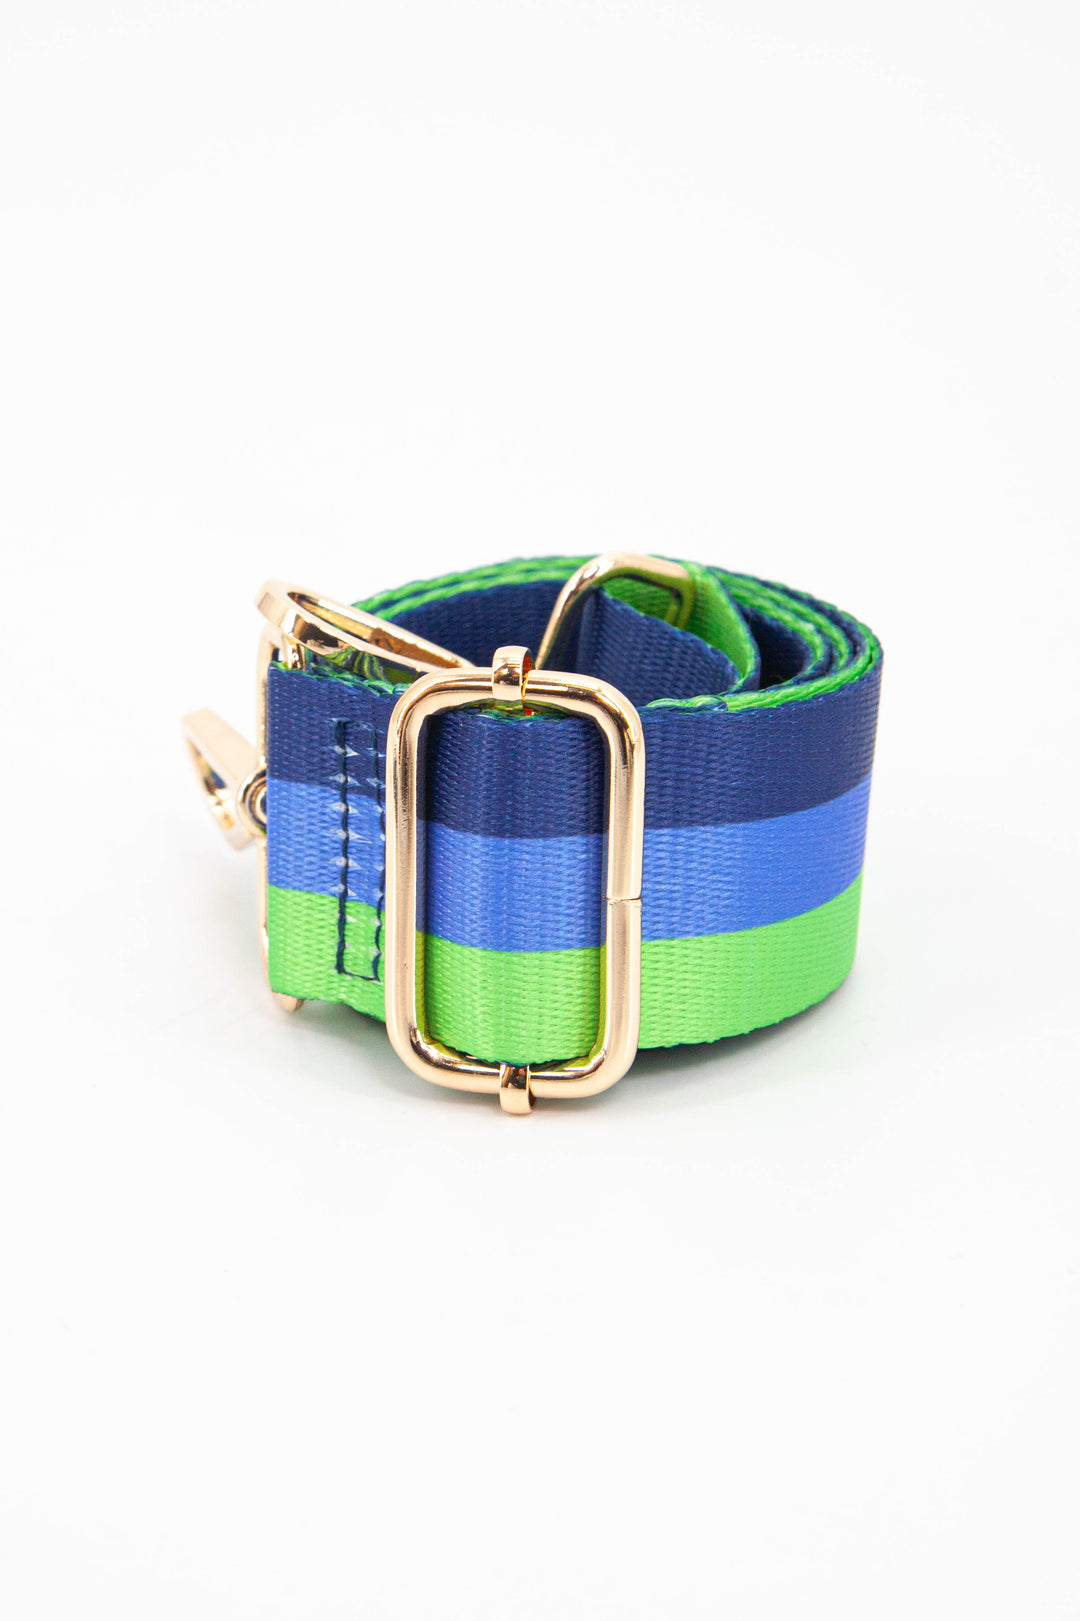 close up of the gold adjustable buckle and three contrasting stripes of green, blue and navy 